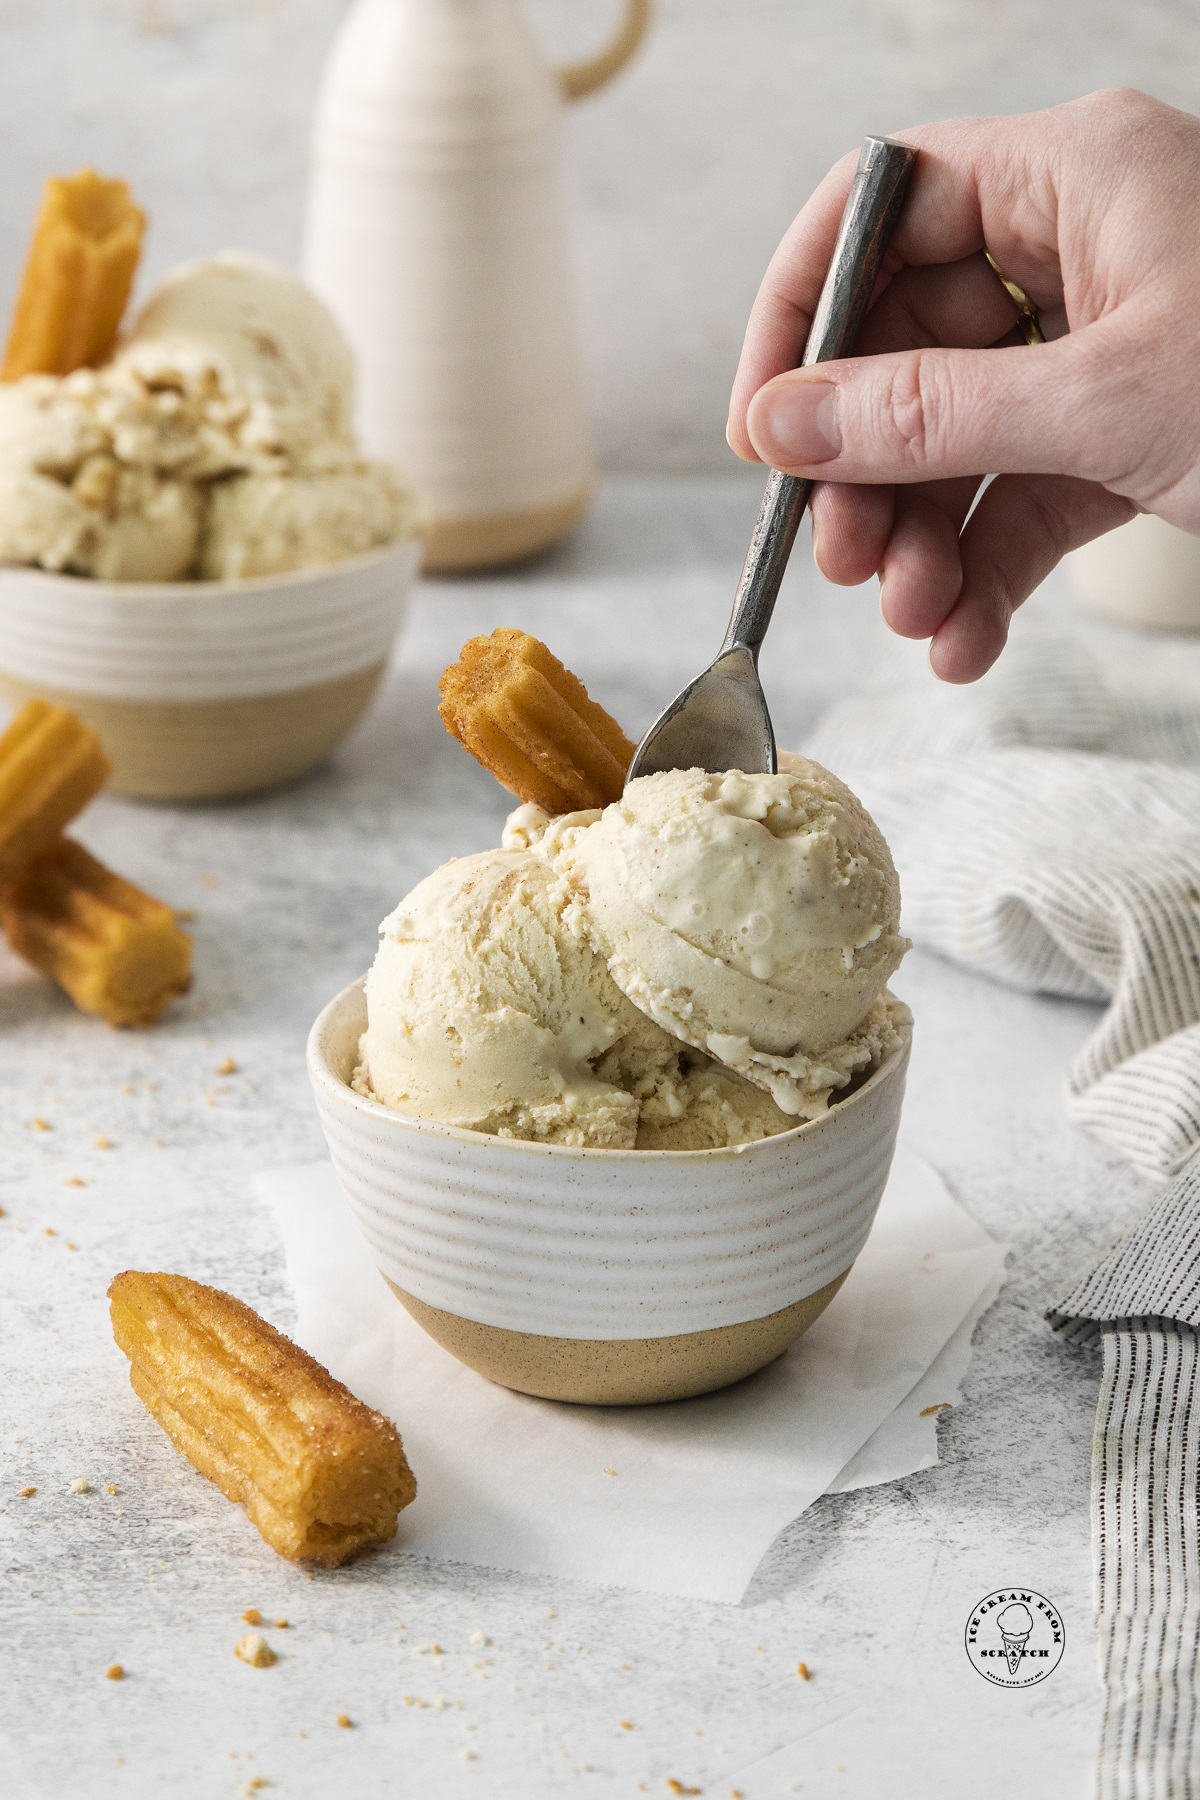 a bowl of homemade ice cream and churros. a hand is eating it with a spoon.